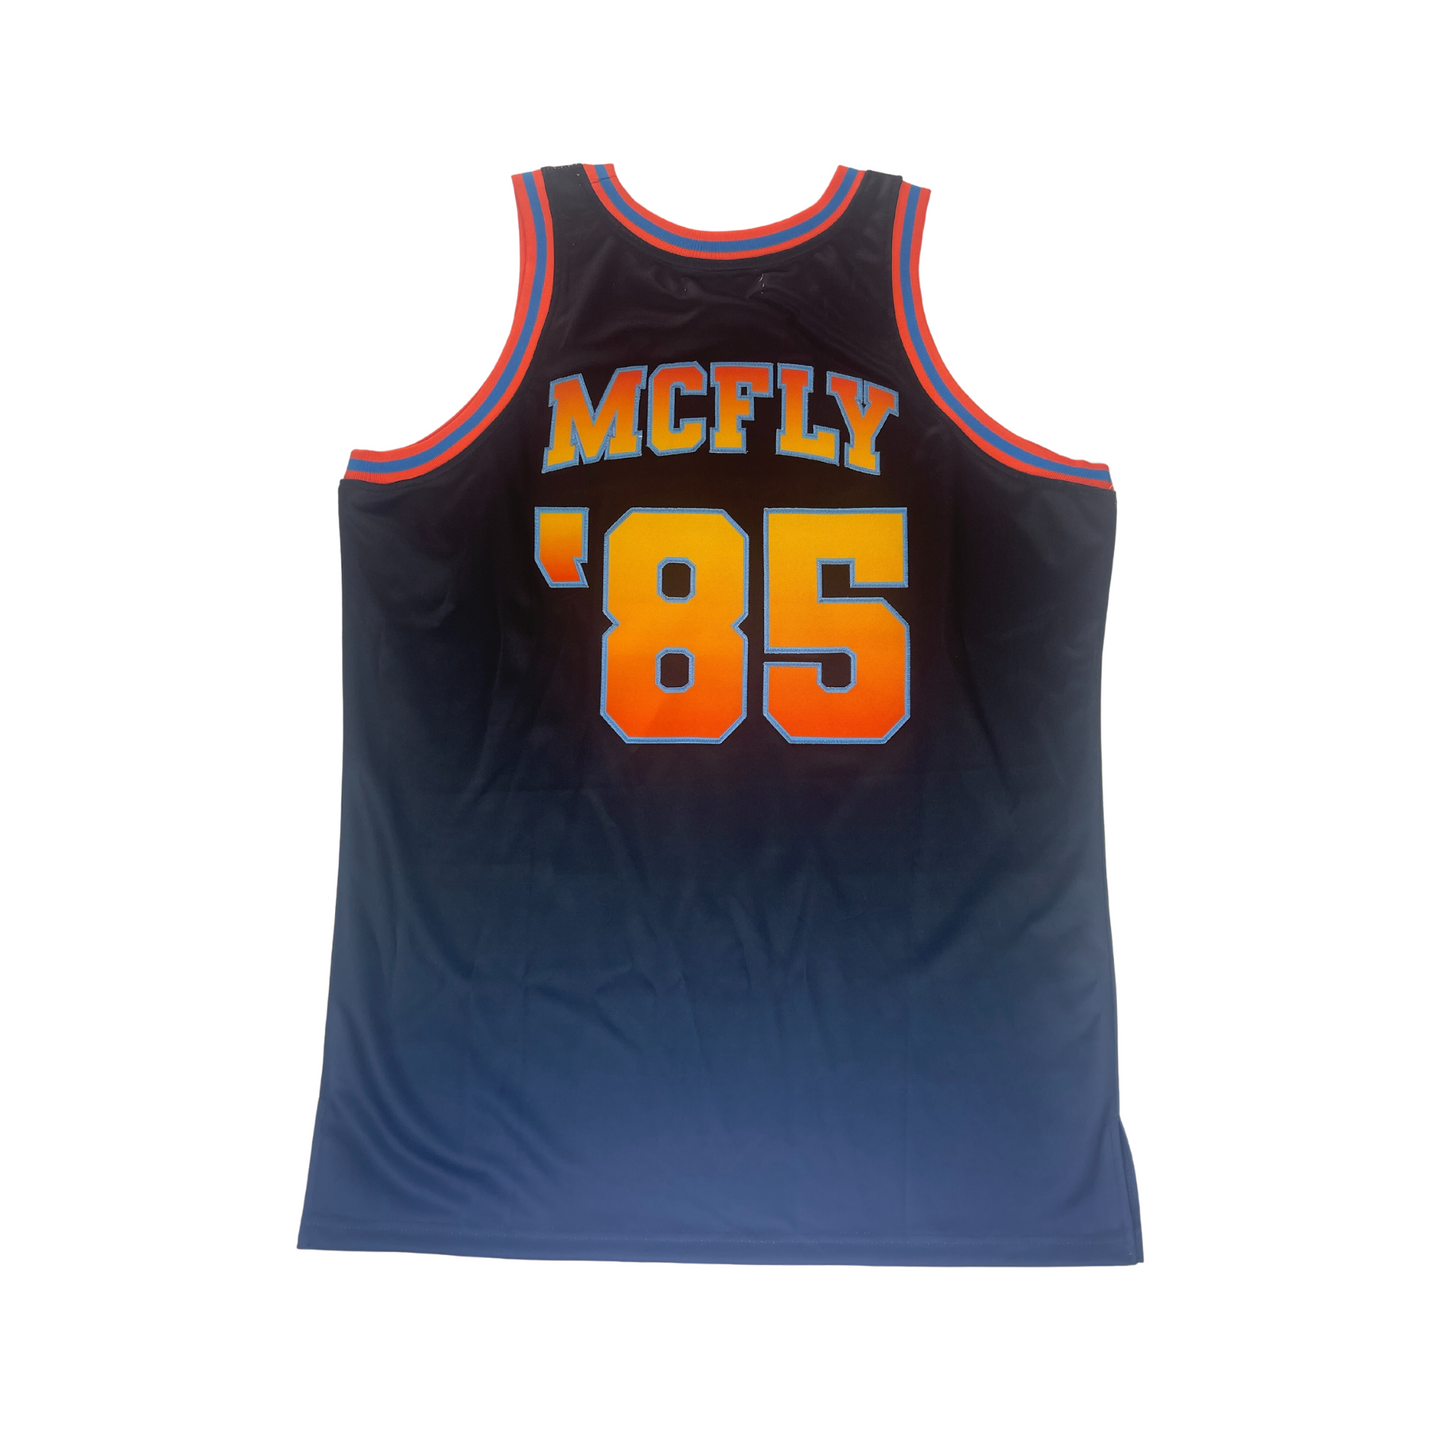 Back to The Future Jersey